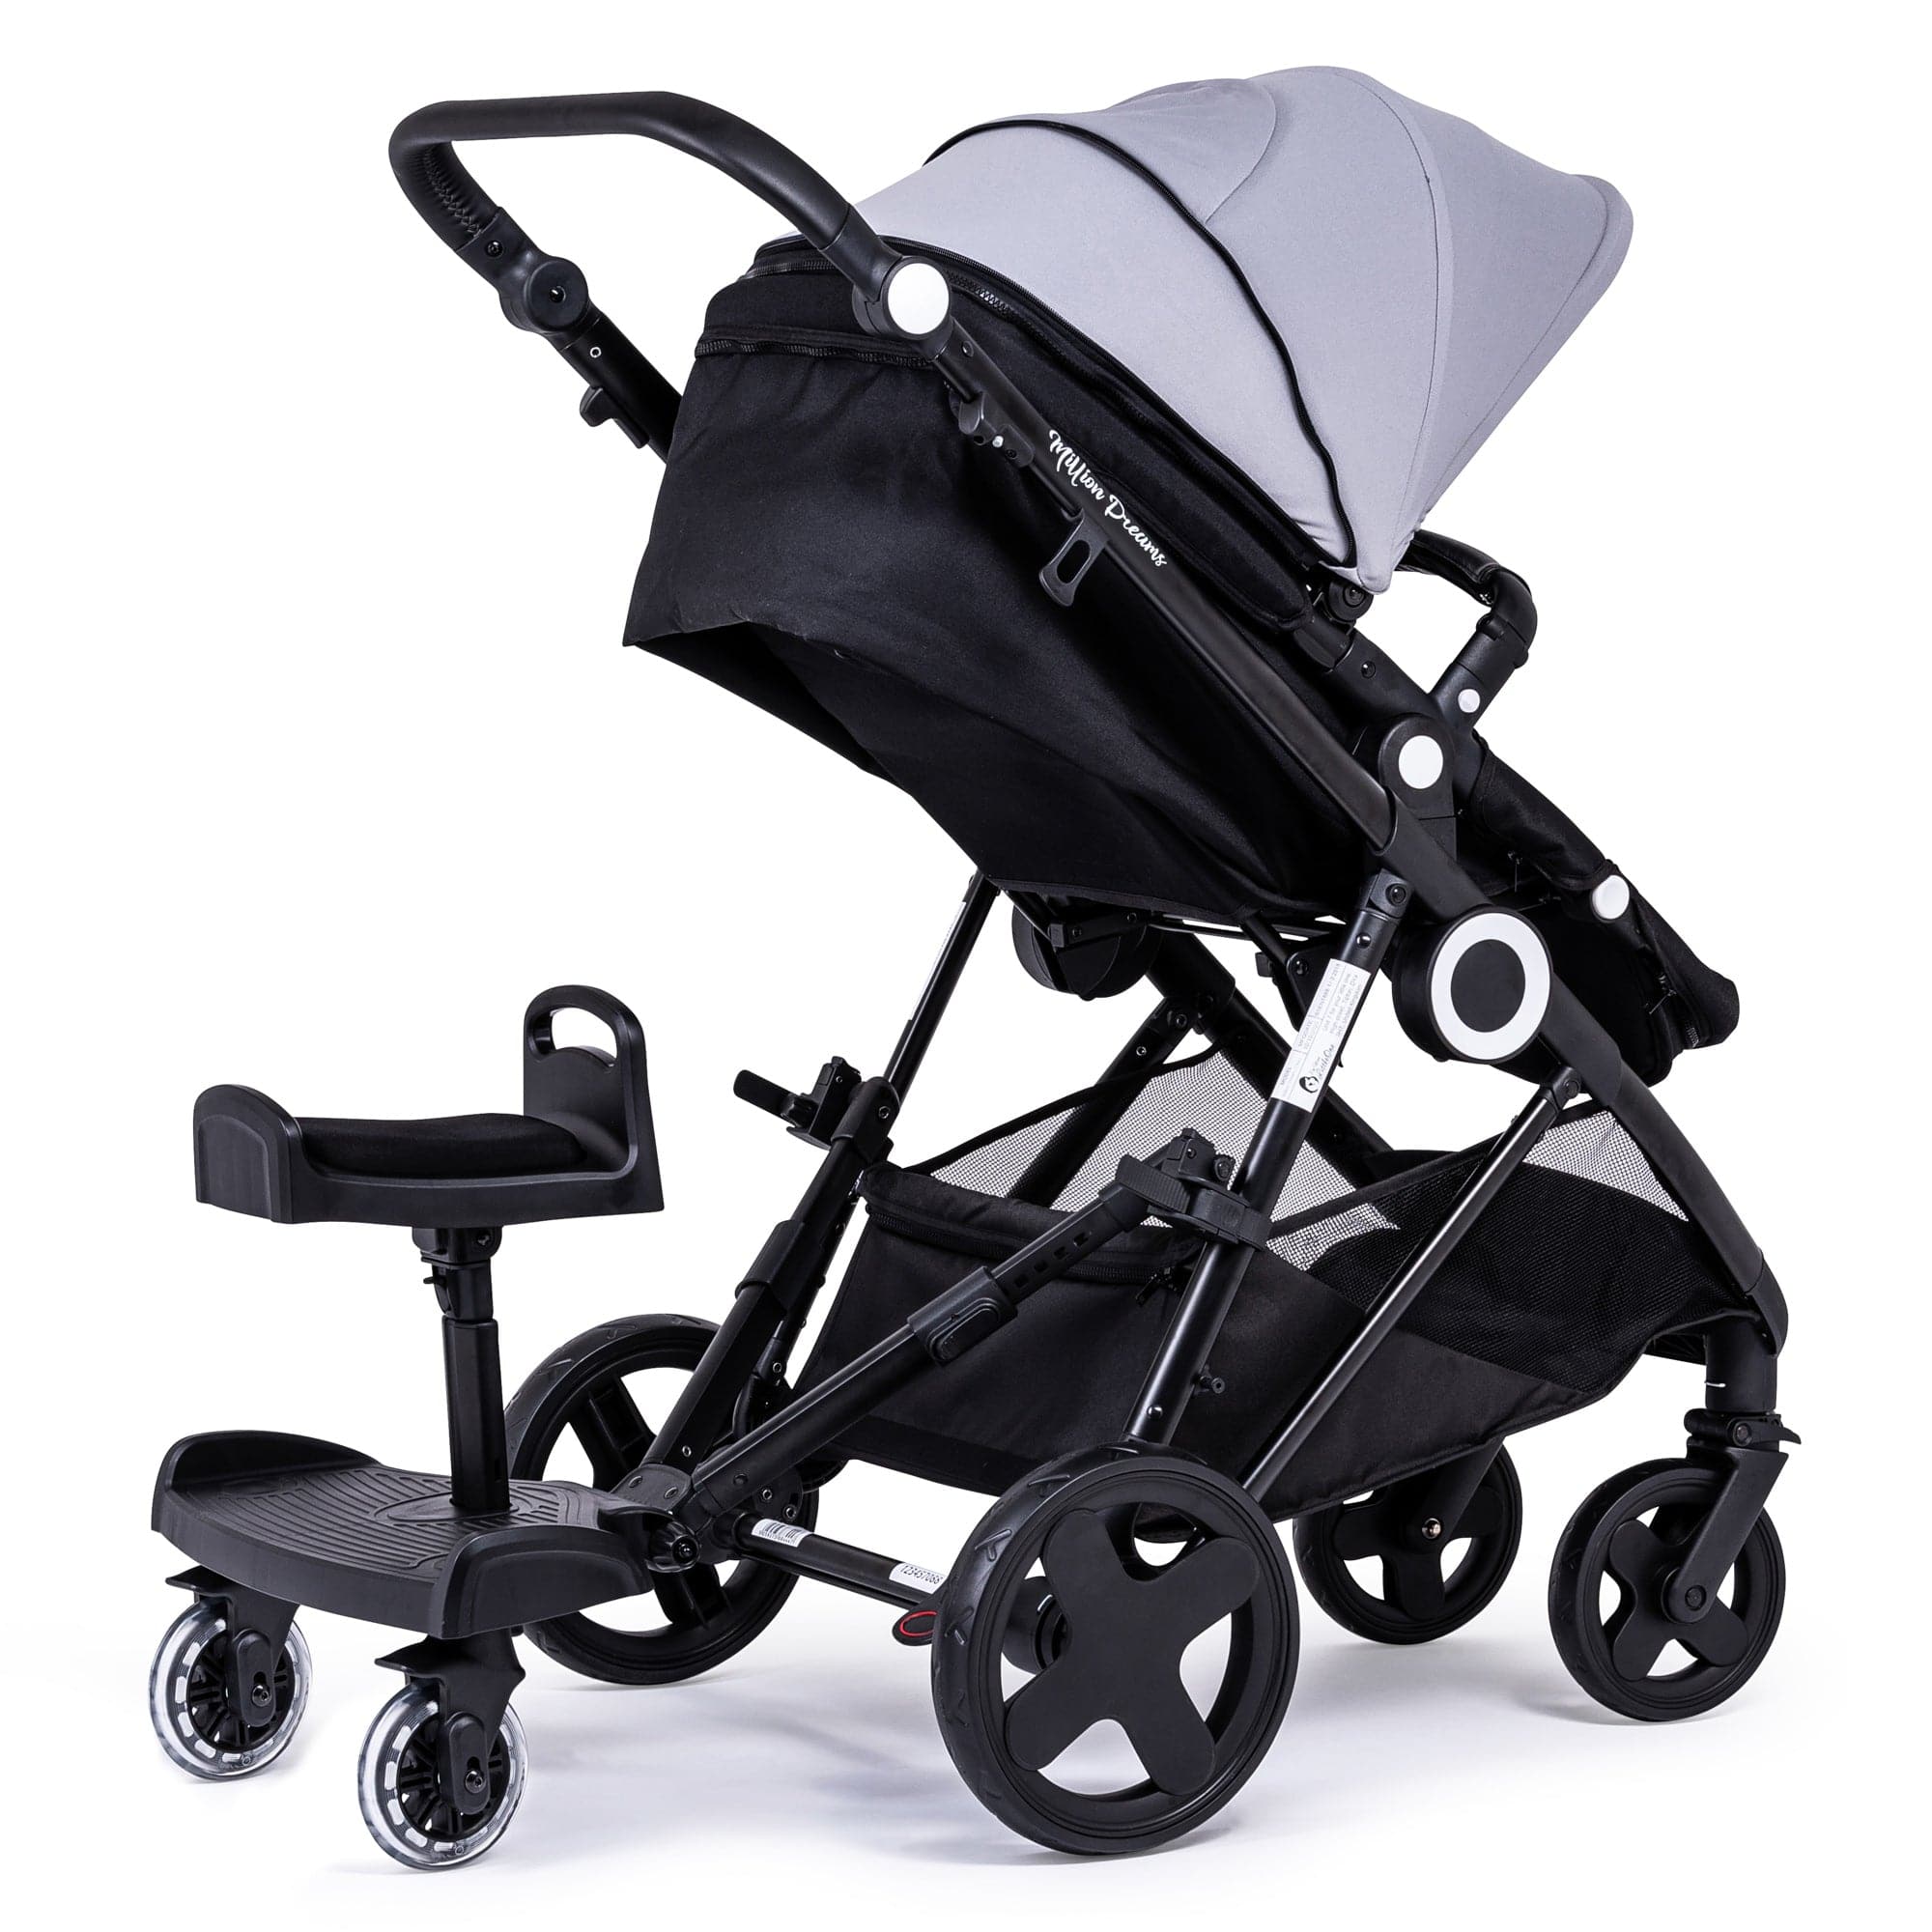 Ride On Board with Seat Compatible with Emmaljunga - For Your Little One